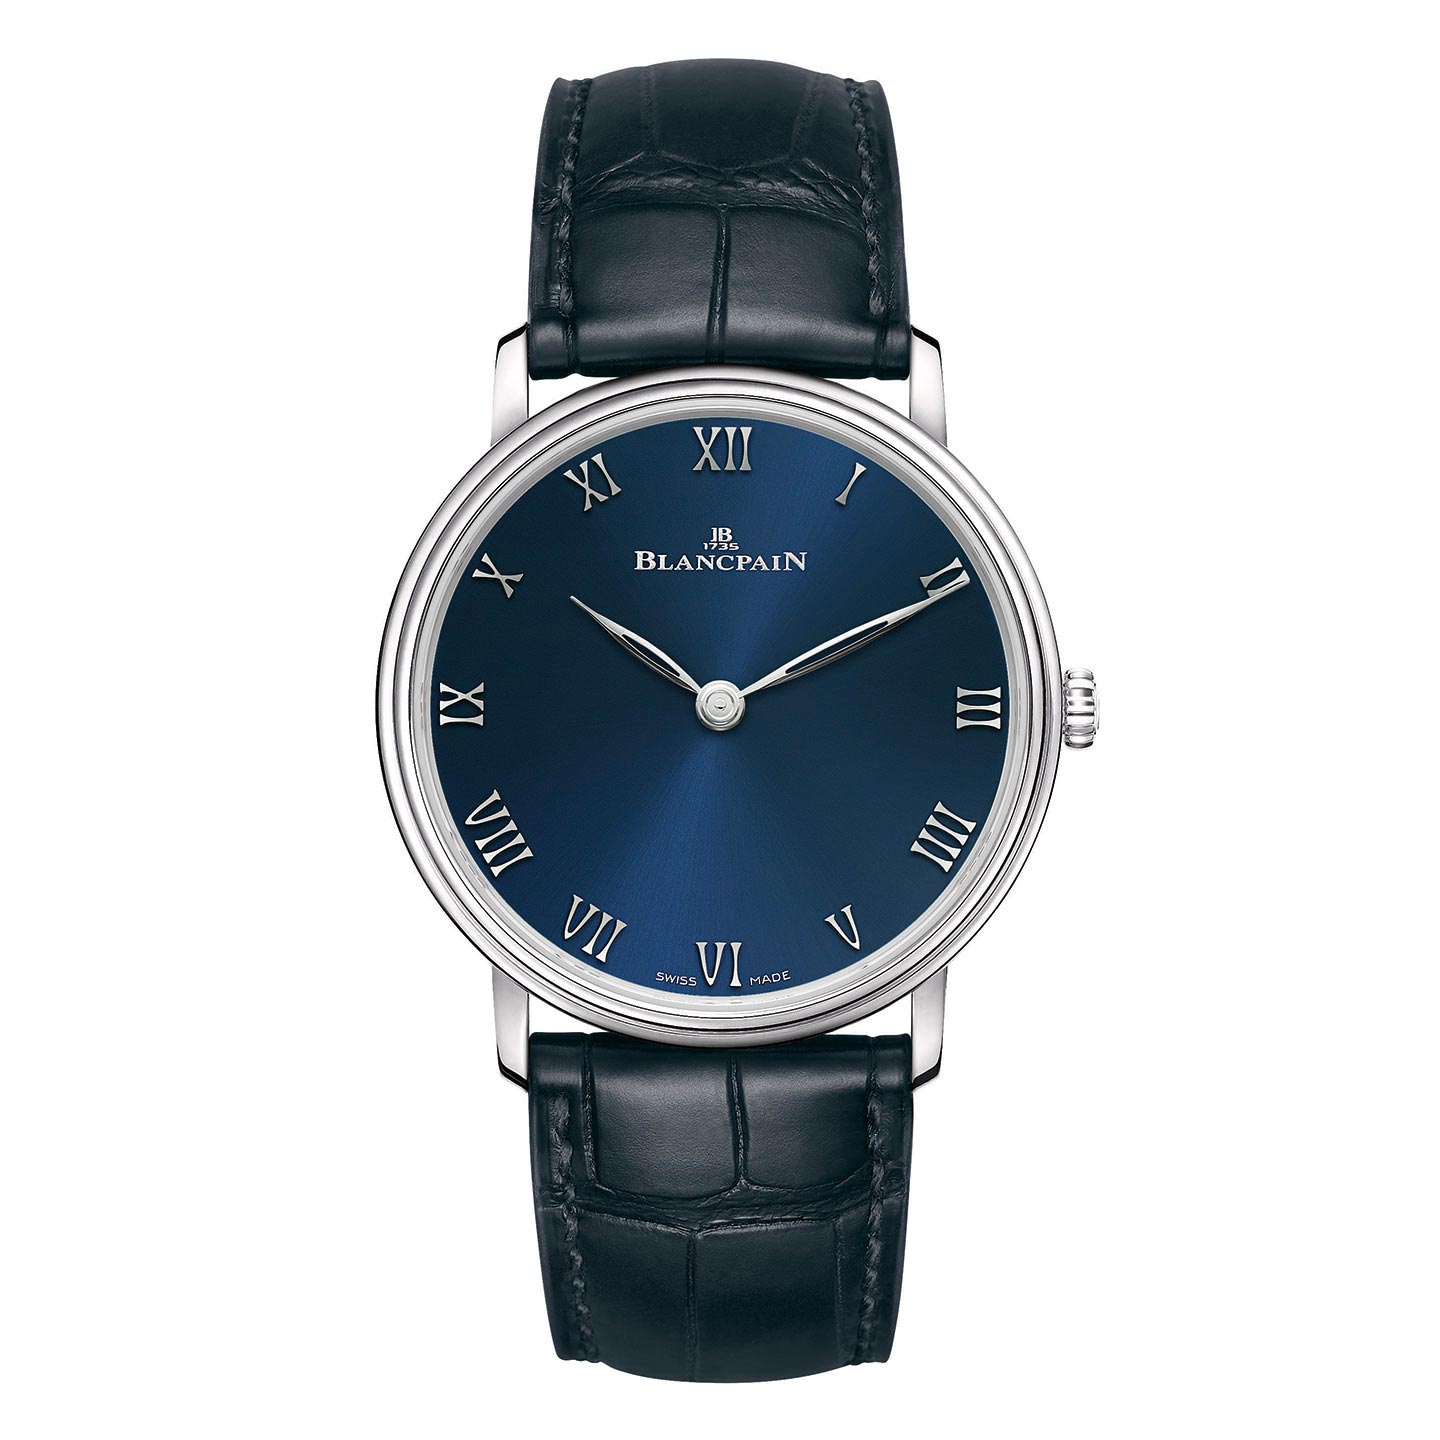 Blancpain - Villeret Ultraplate Blue Dial | Time and Watches | The ...